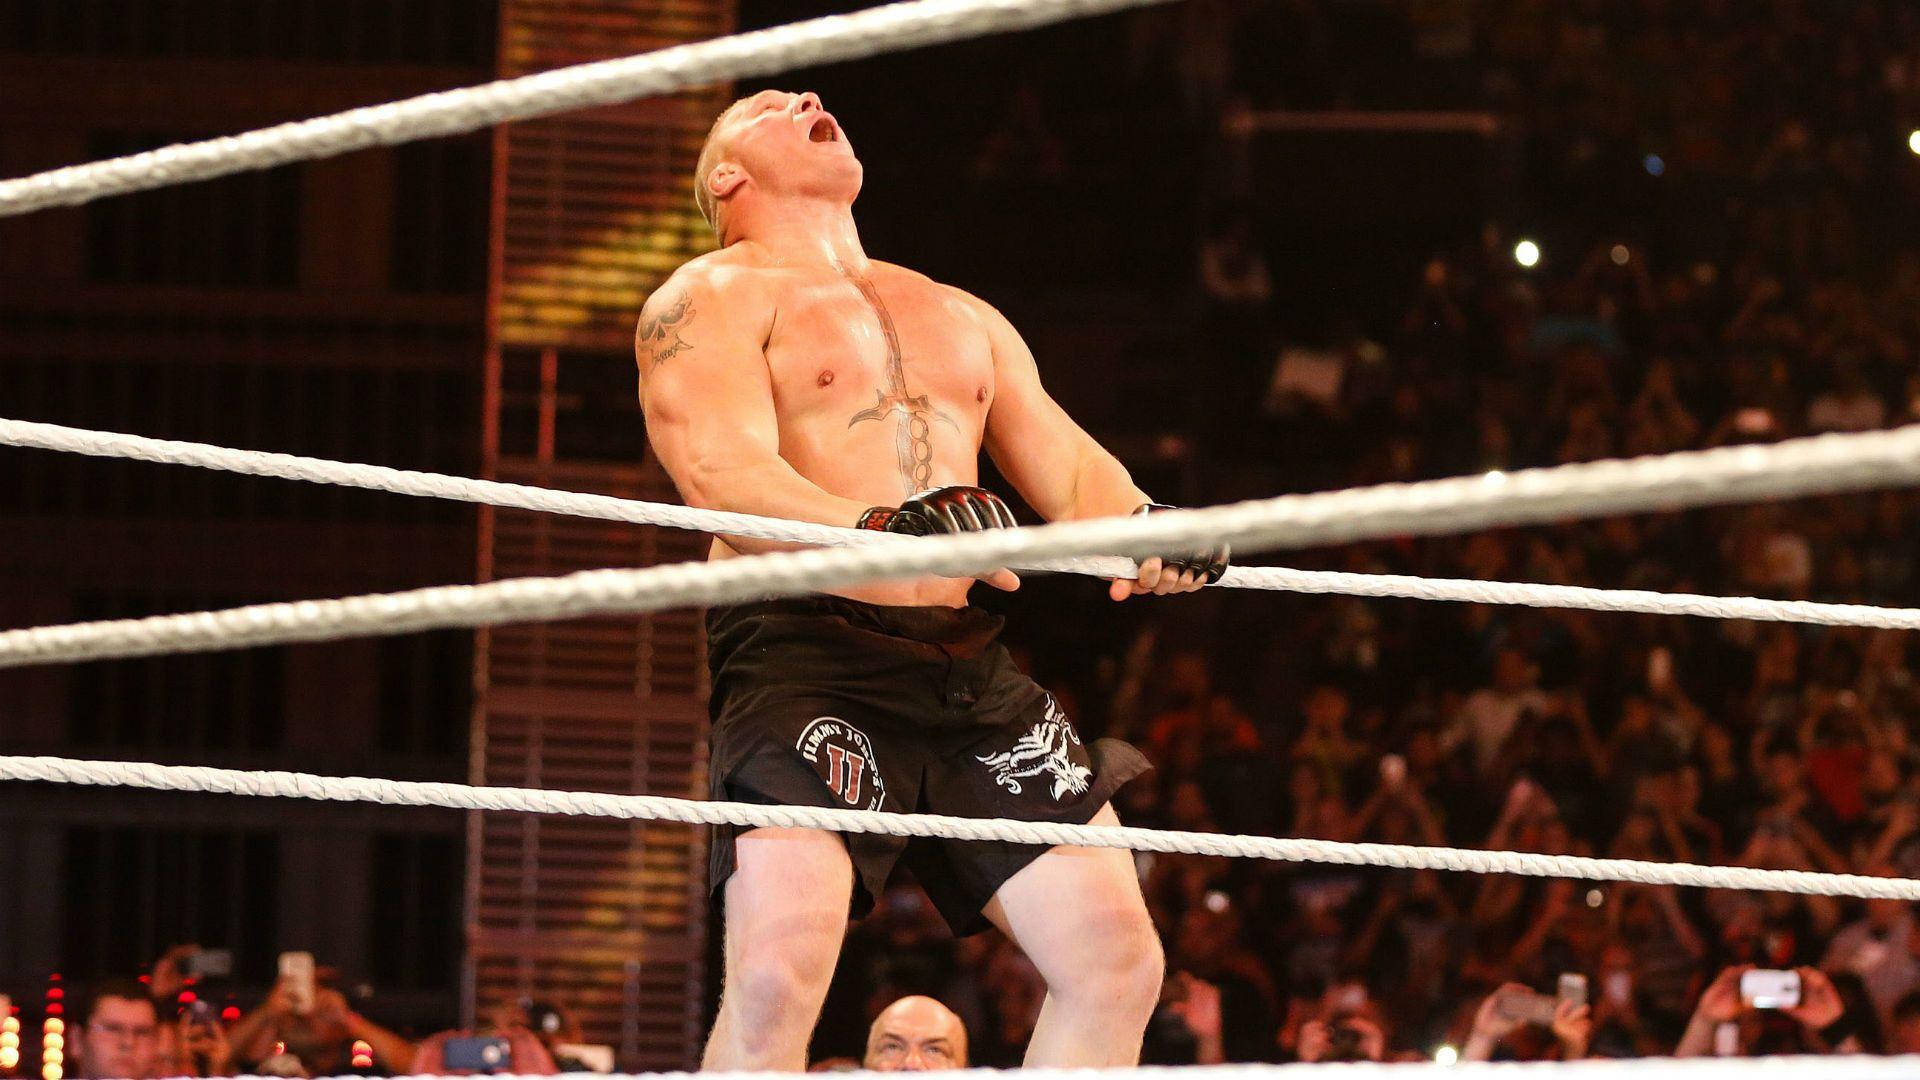 Brock Lesnar Dominating The Ring In Full Action Background